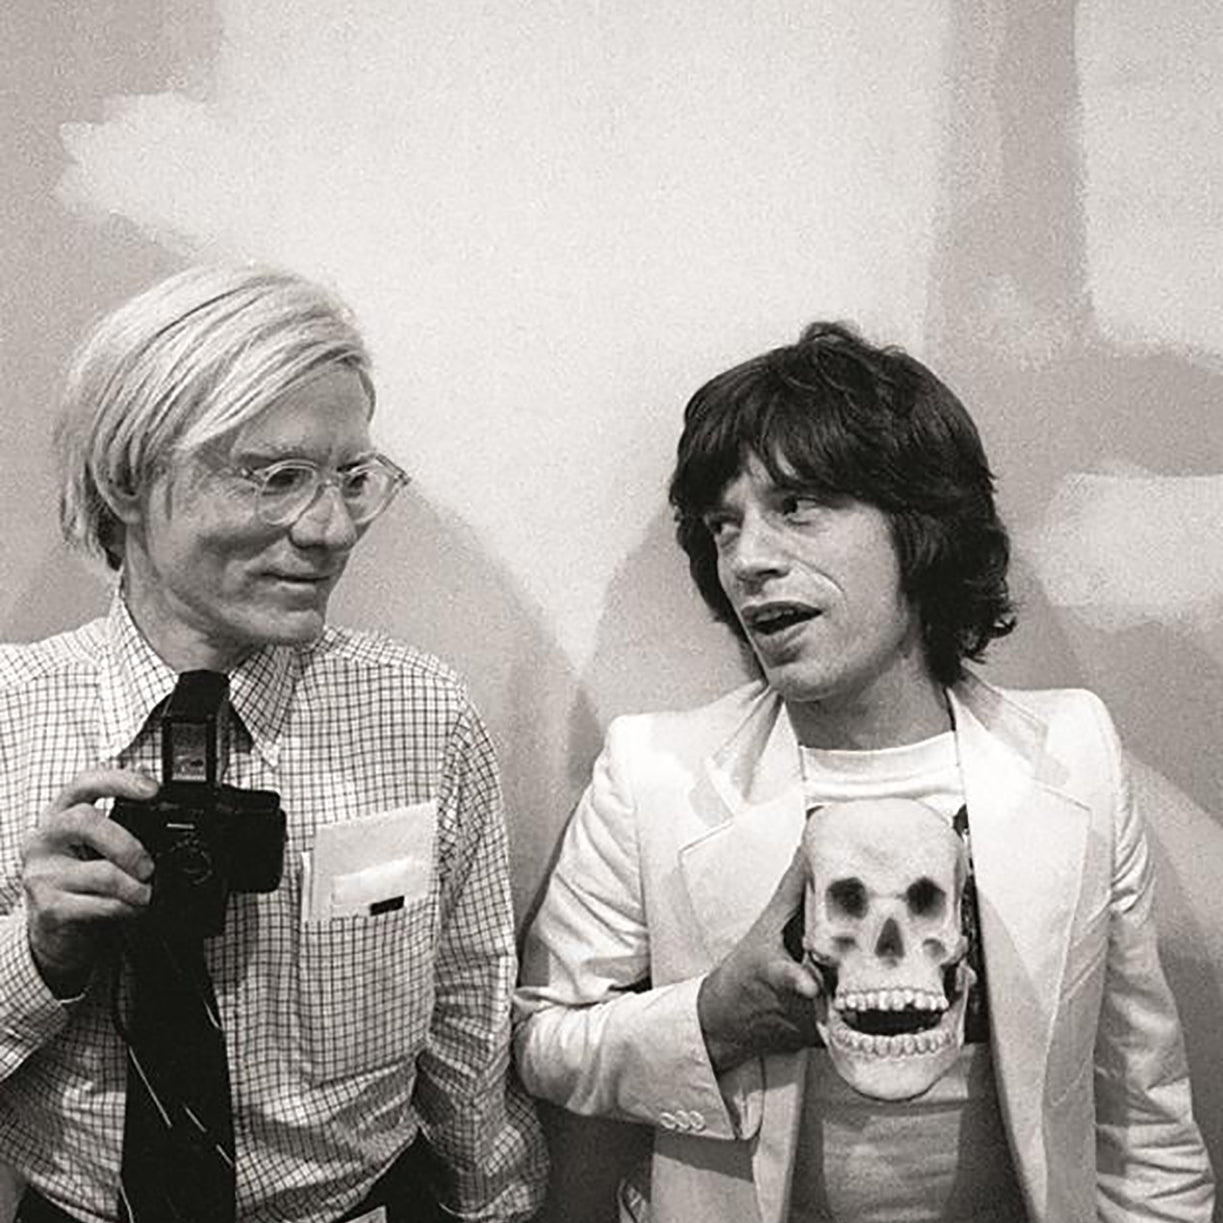 Andy Warhol's Mick Jagger Obsession